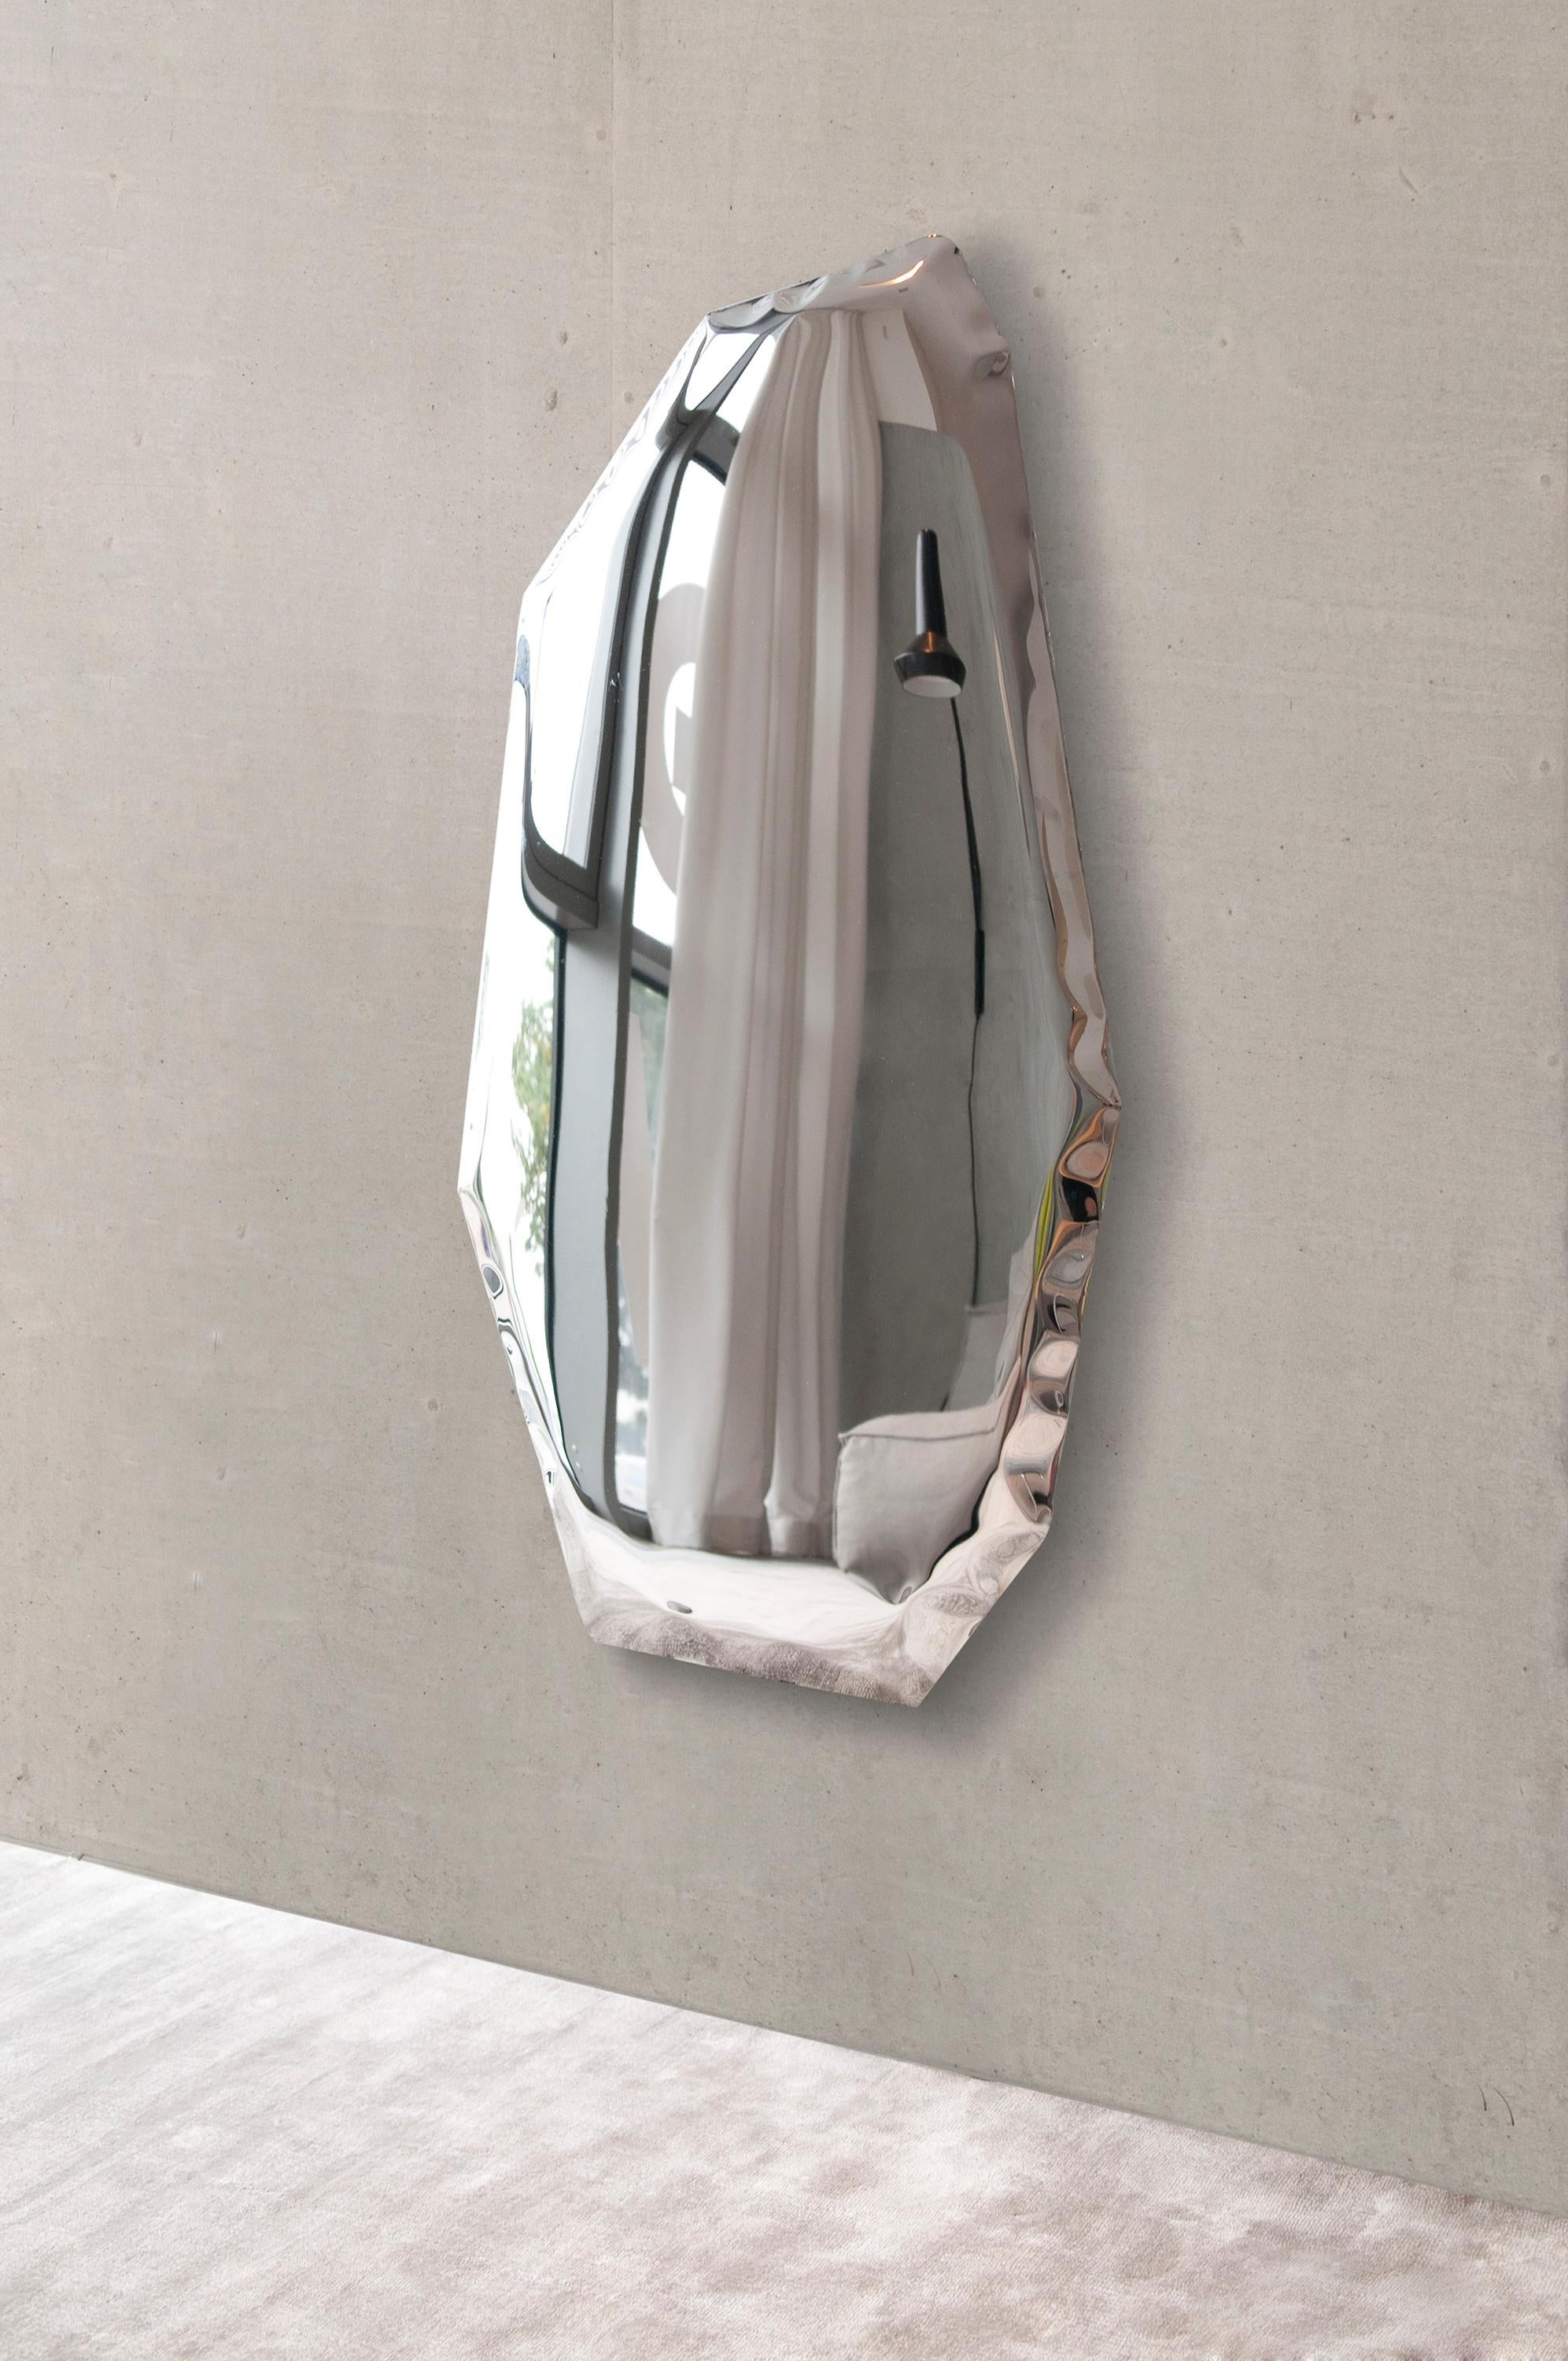 Stainless Steel Tafla C6 Sculptural Wall Mirror by Zieta For Sale 1